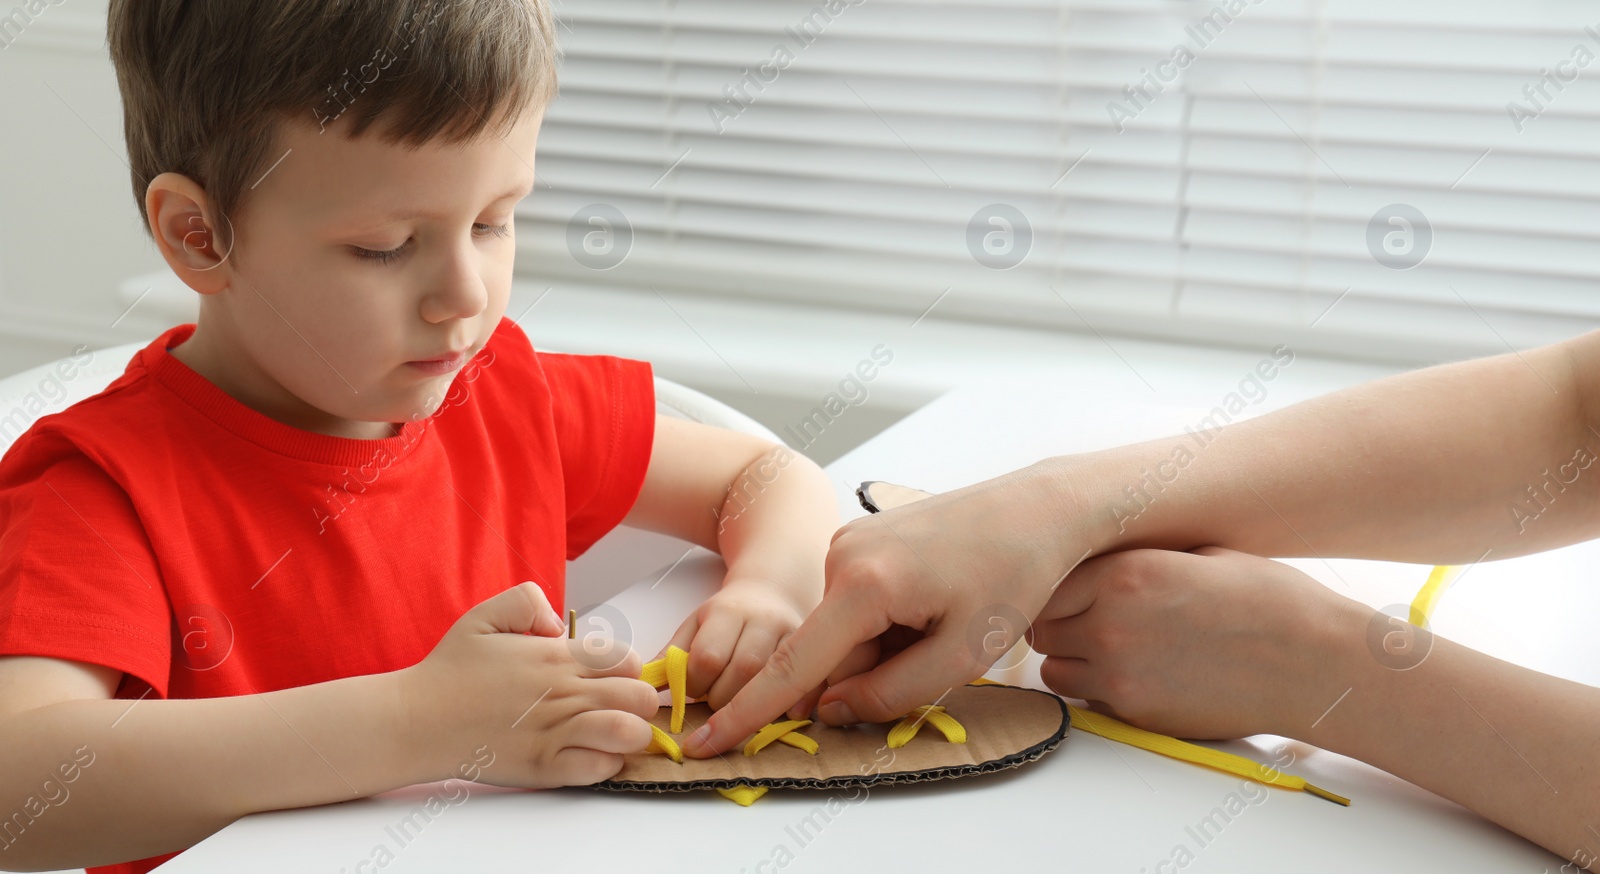 Photo of Mother teaching son to tie shoe laces using training cardboard template at white table, closeup